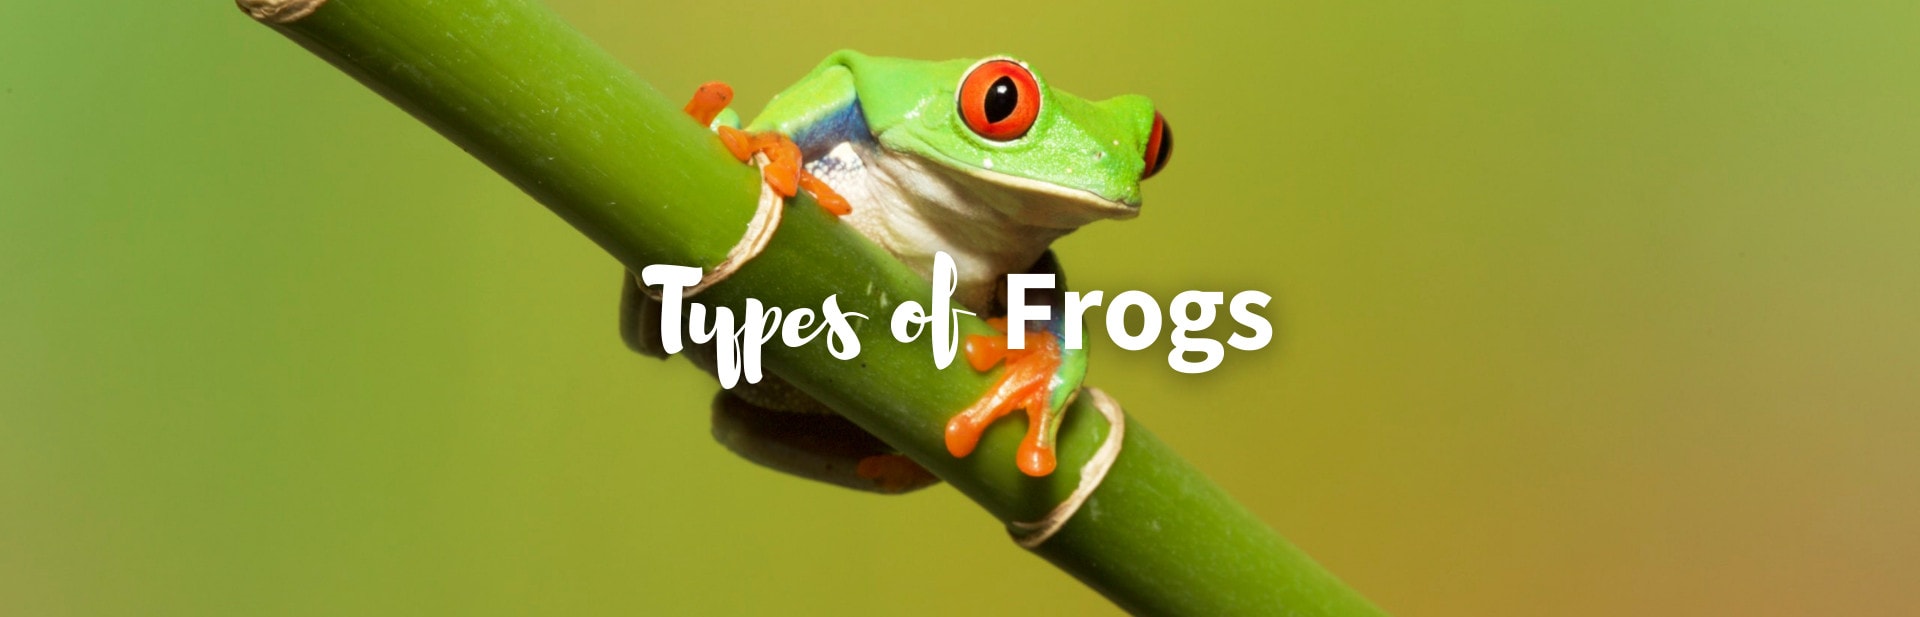 23 Amazing Types of Frogs From Around the World - Outforia